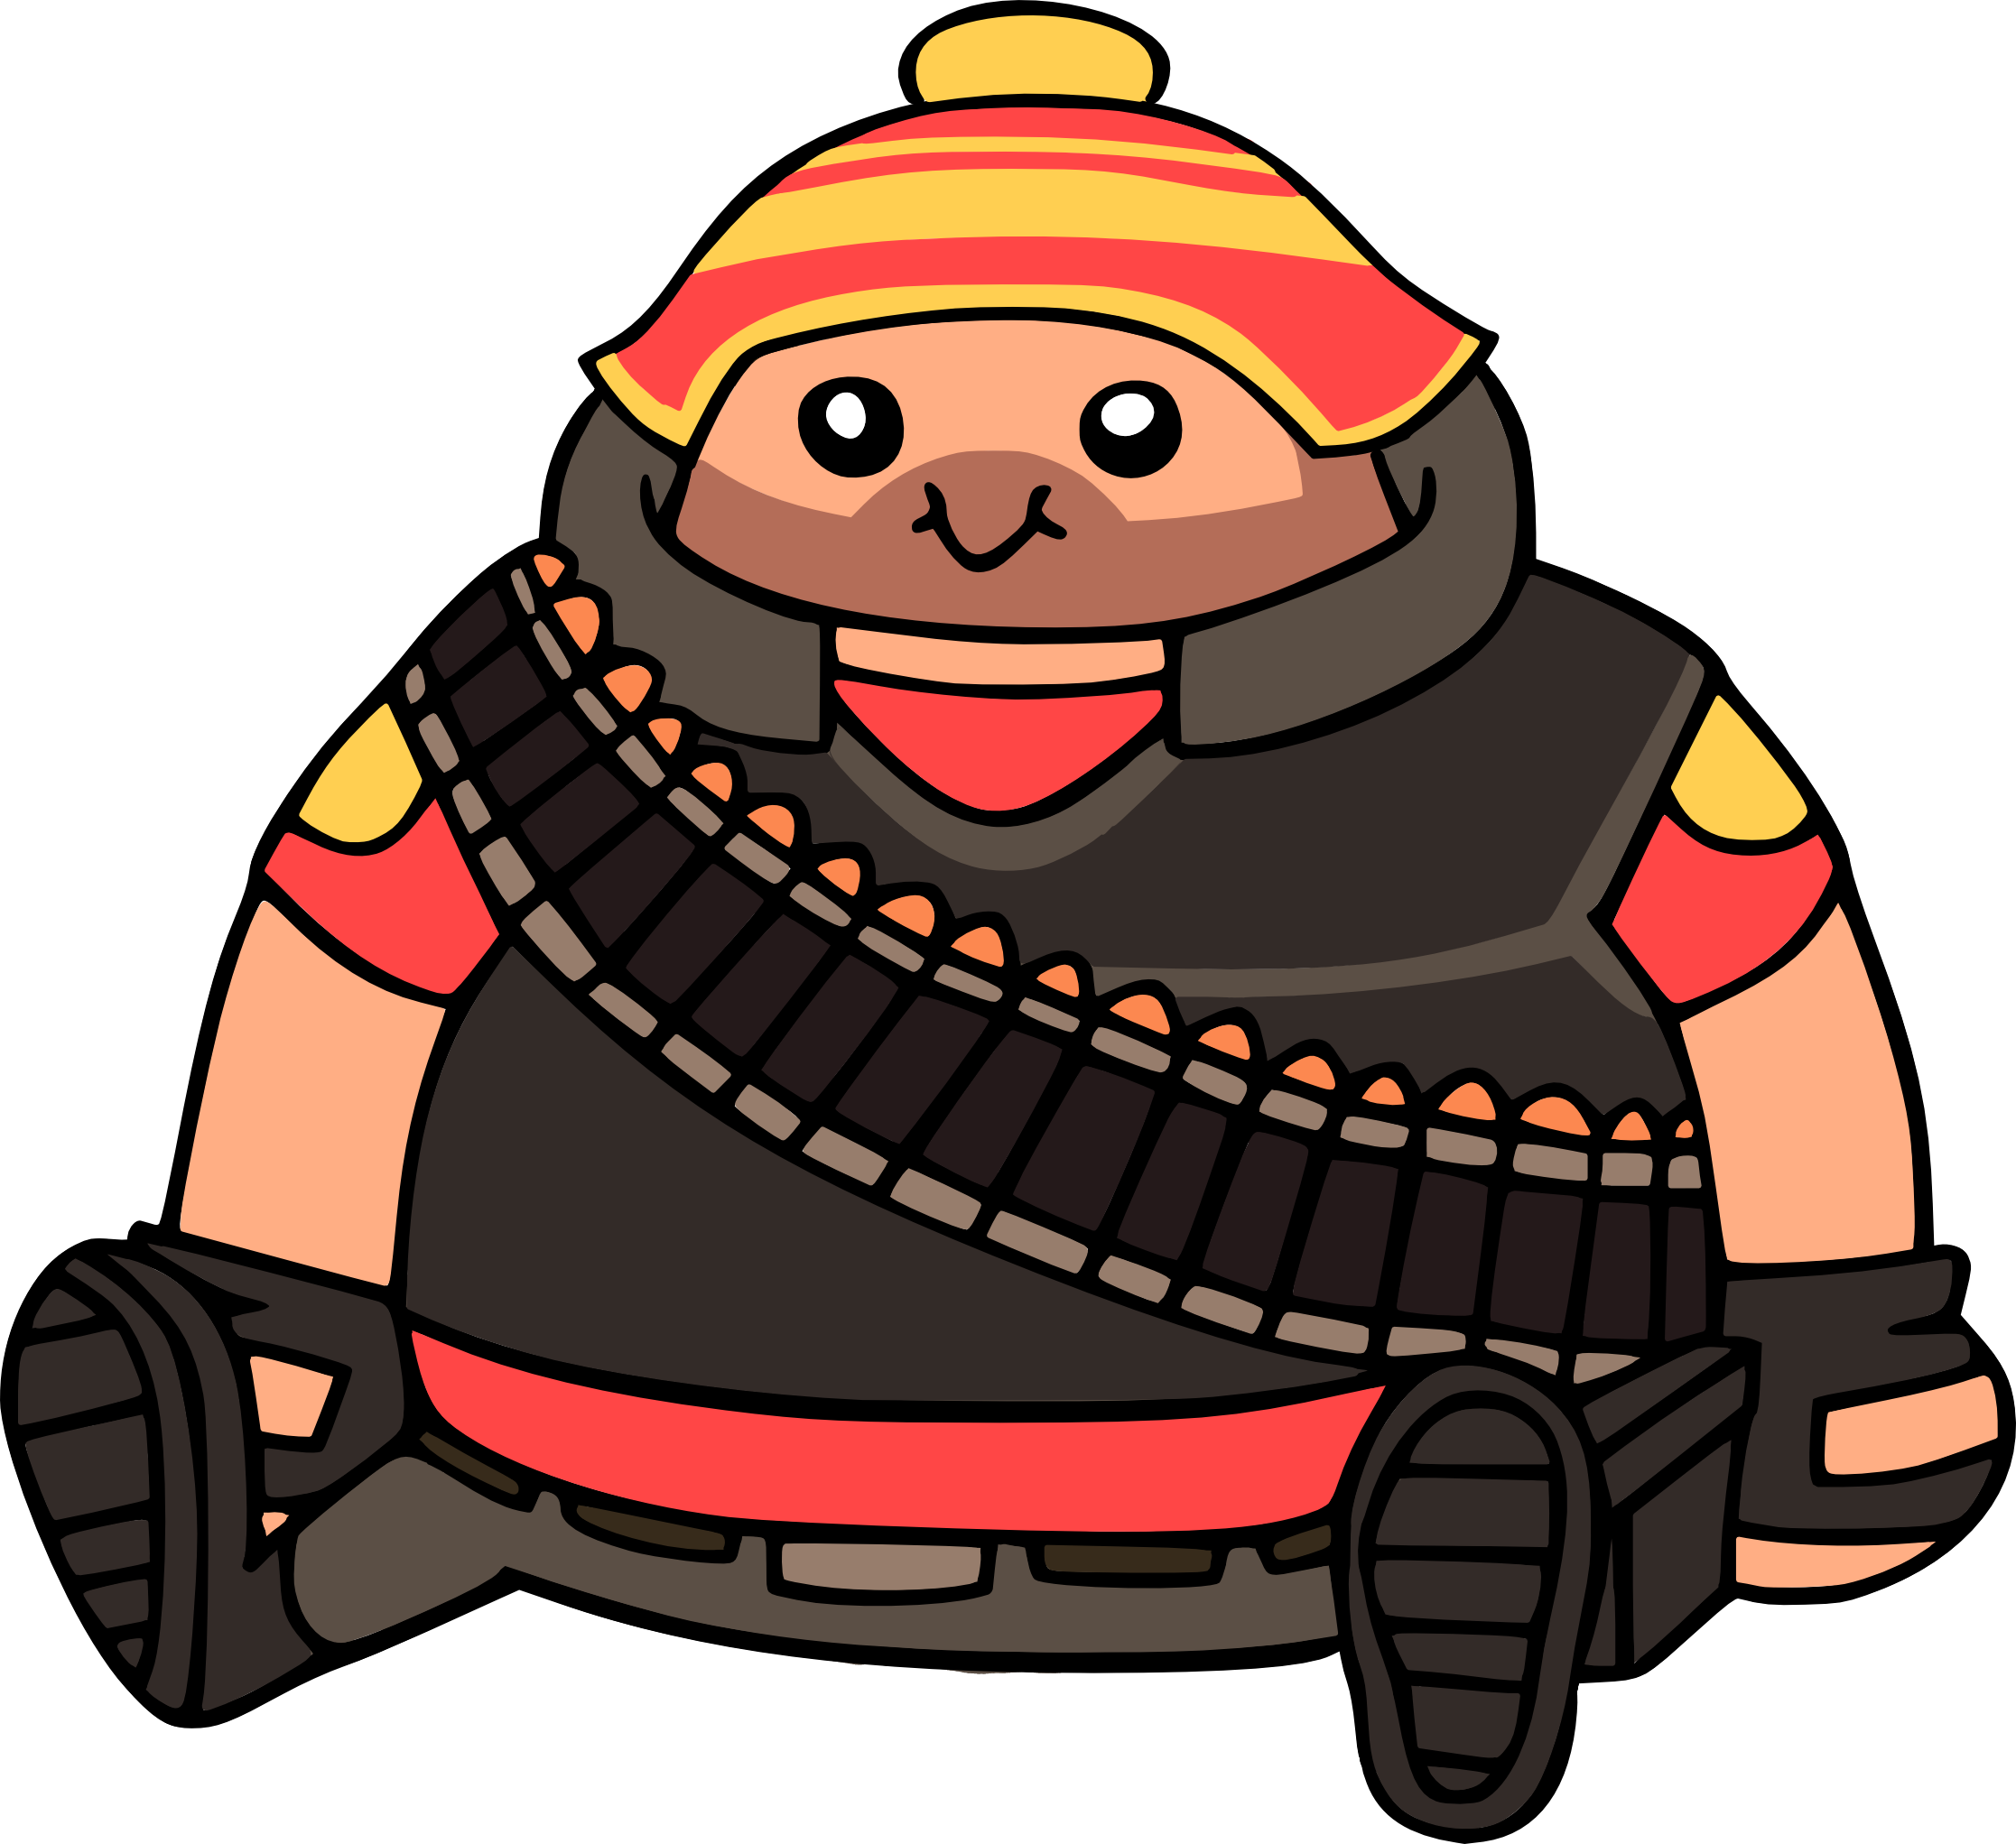 Steam community guide best. Warrior clipart traditional thai